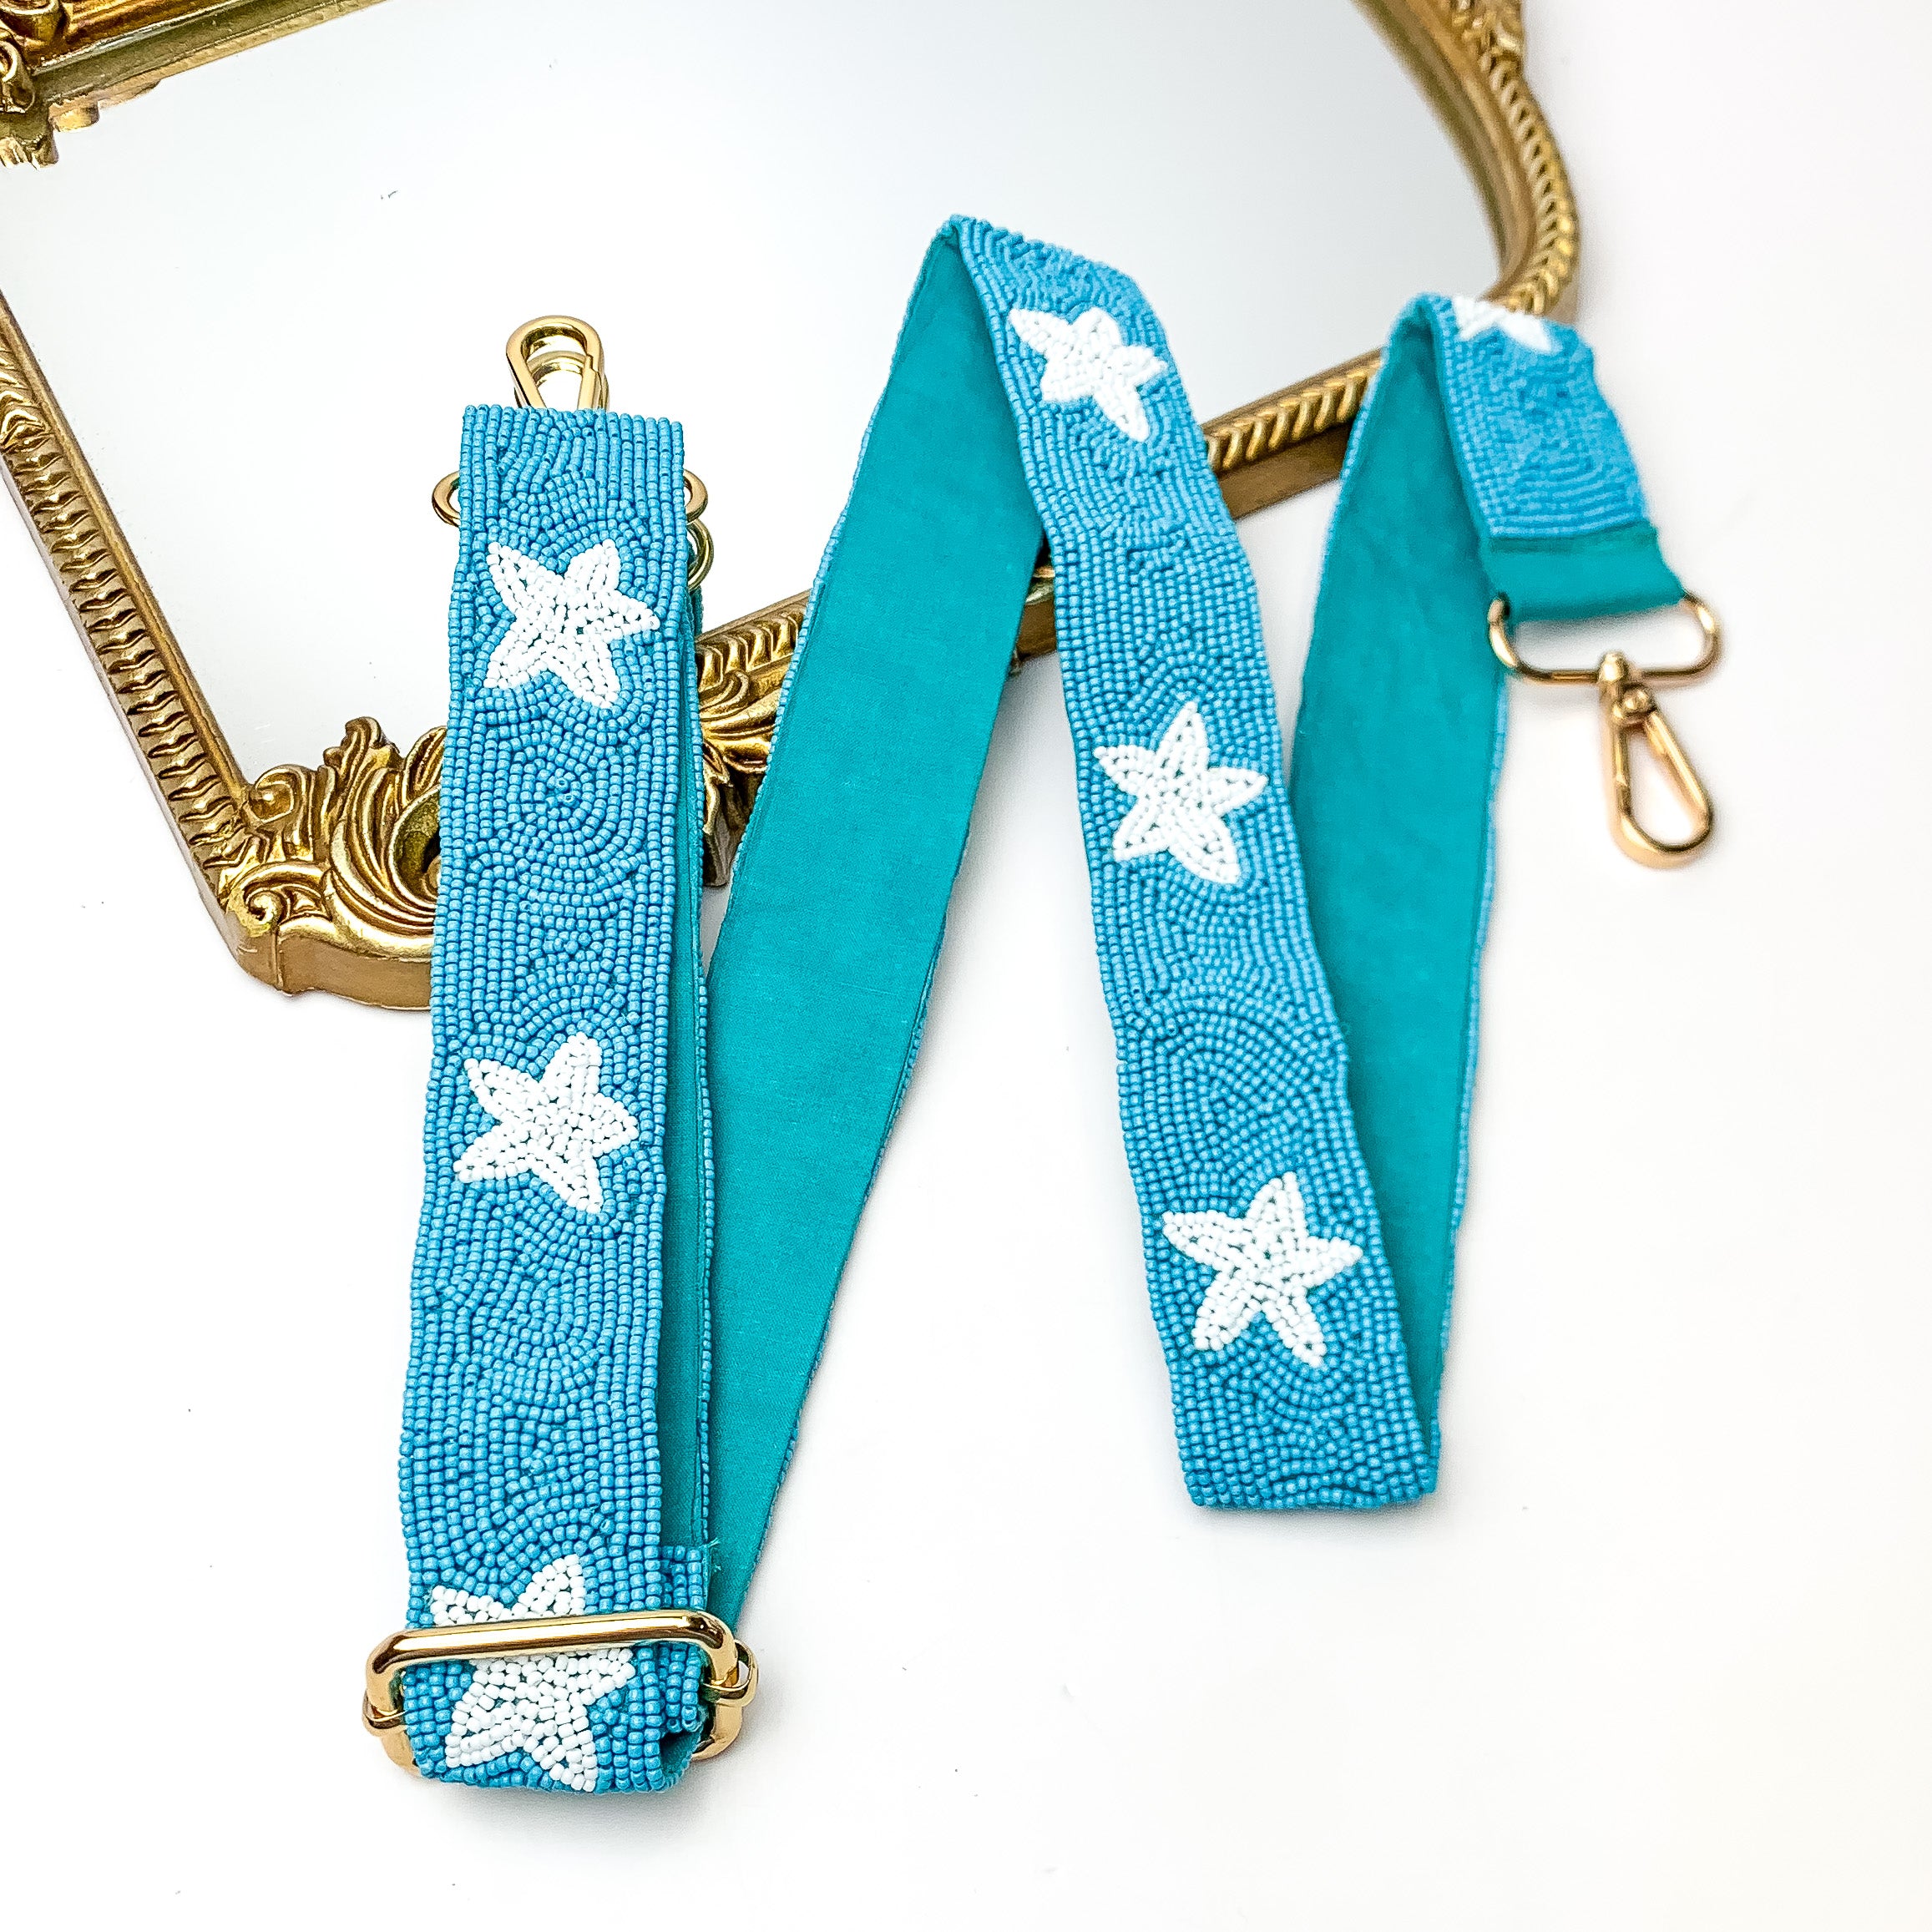 Star of the Show Beaded Adjustable Purse Strap in Blue and White. This purse strap is pictured on a white background with a gold trimmed mirror in the corner.